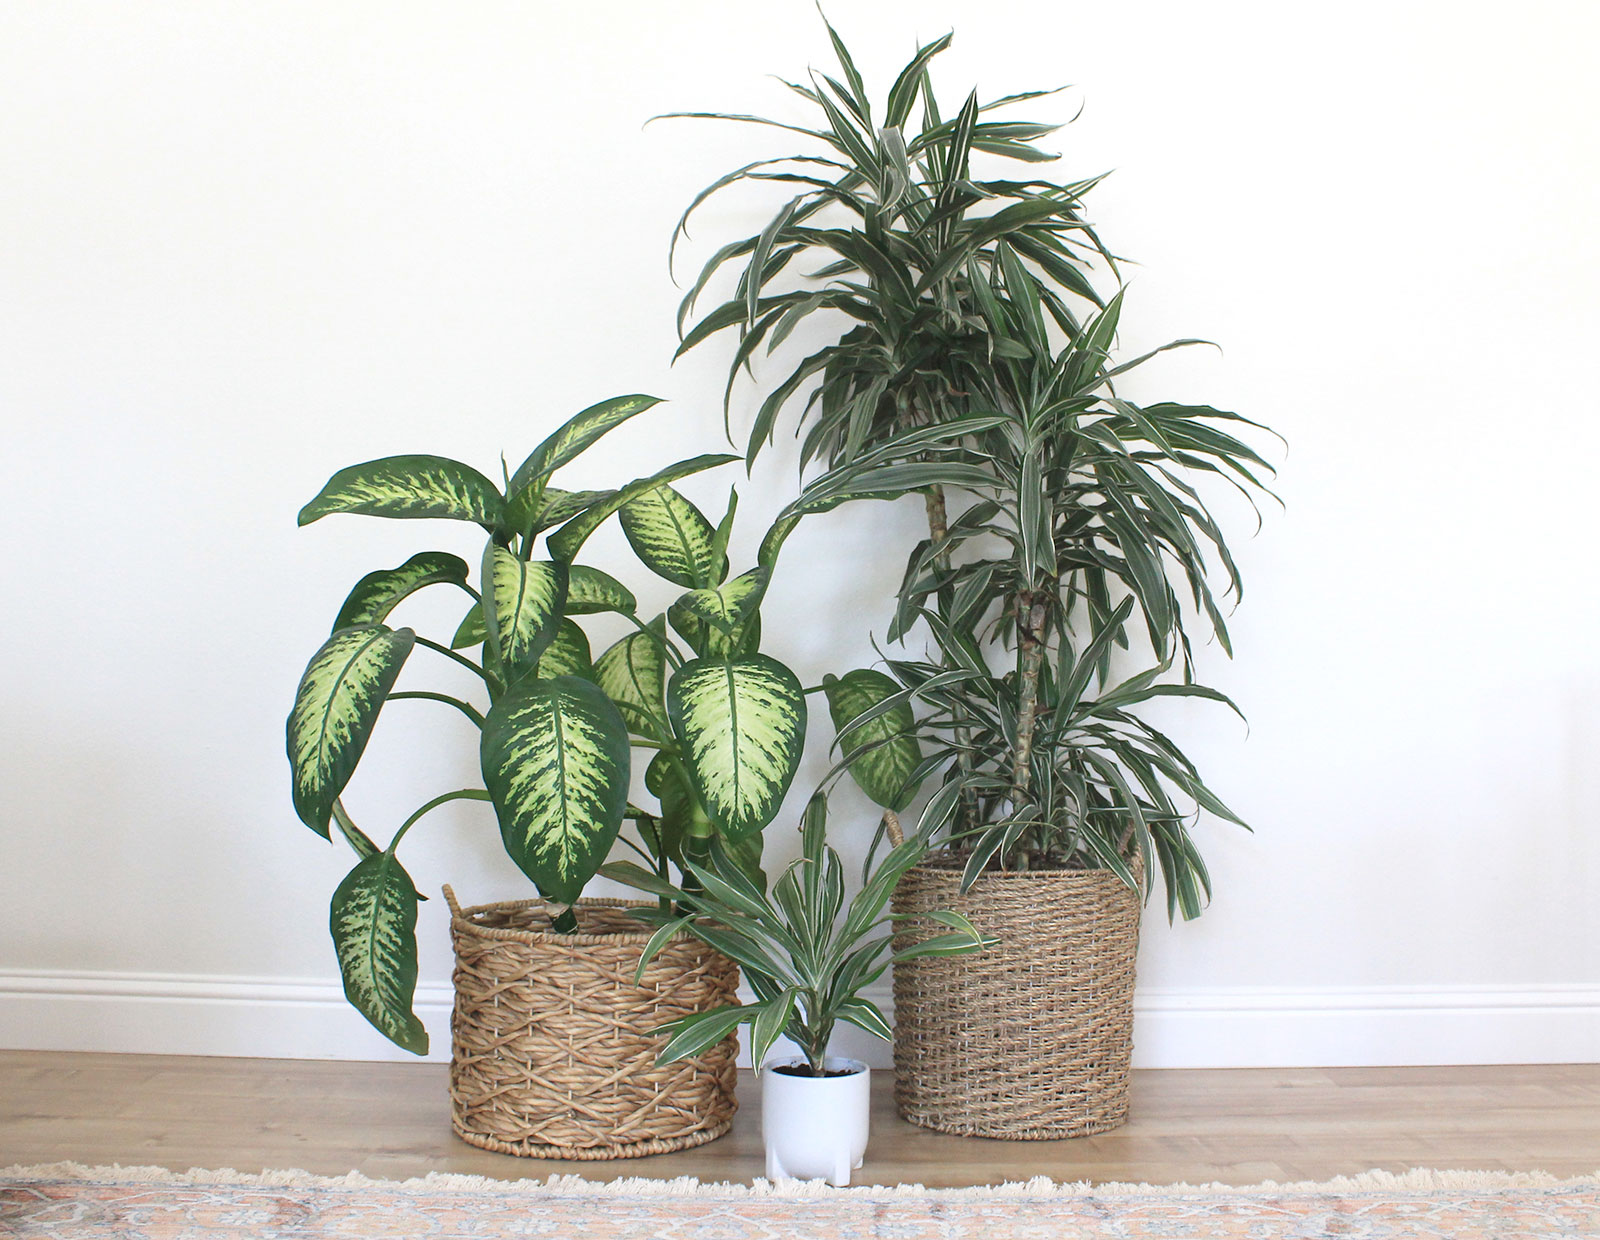 How to clean houseplants